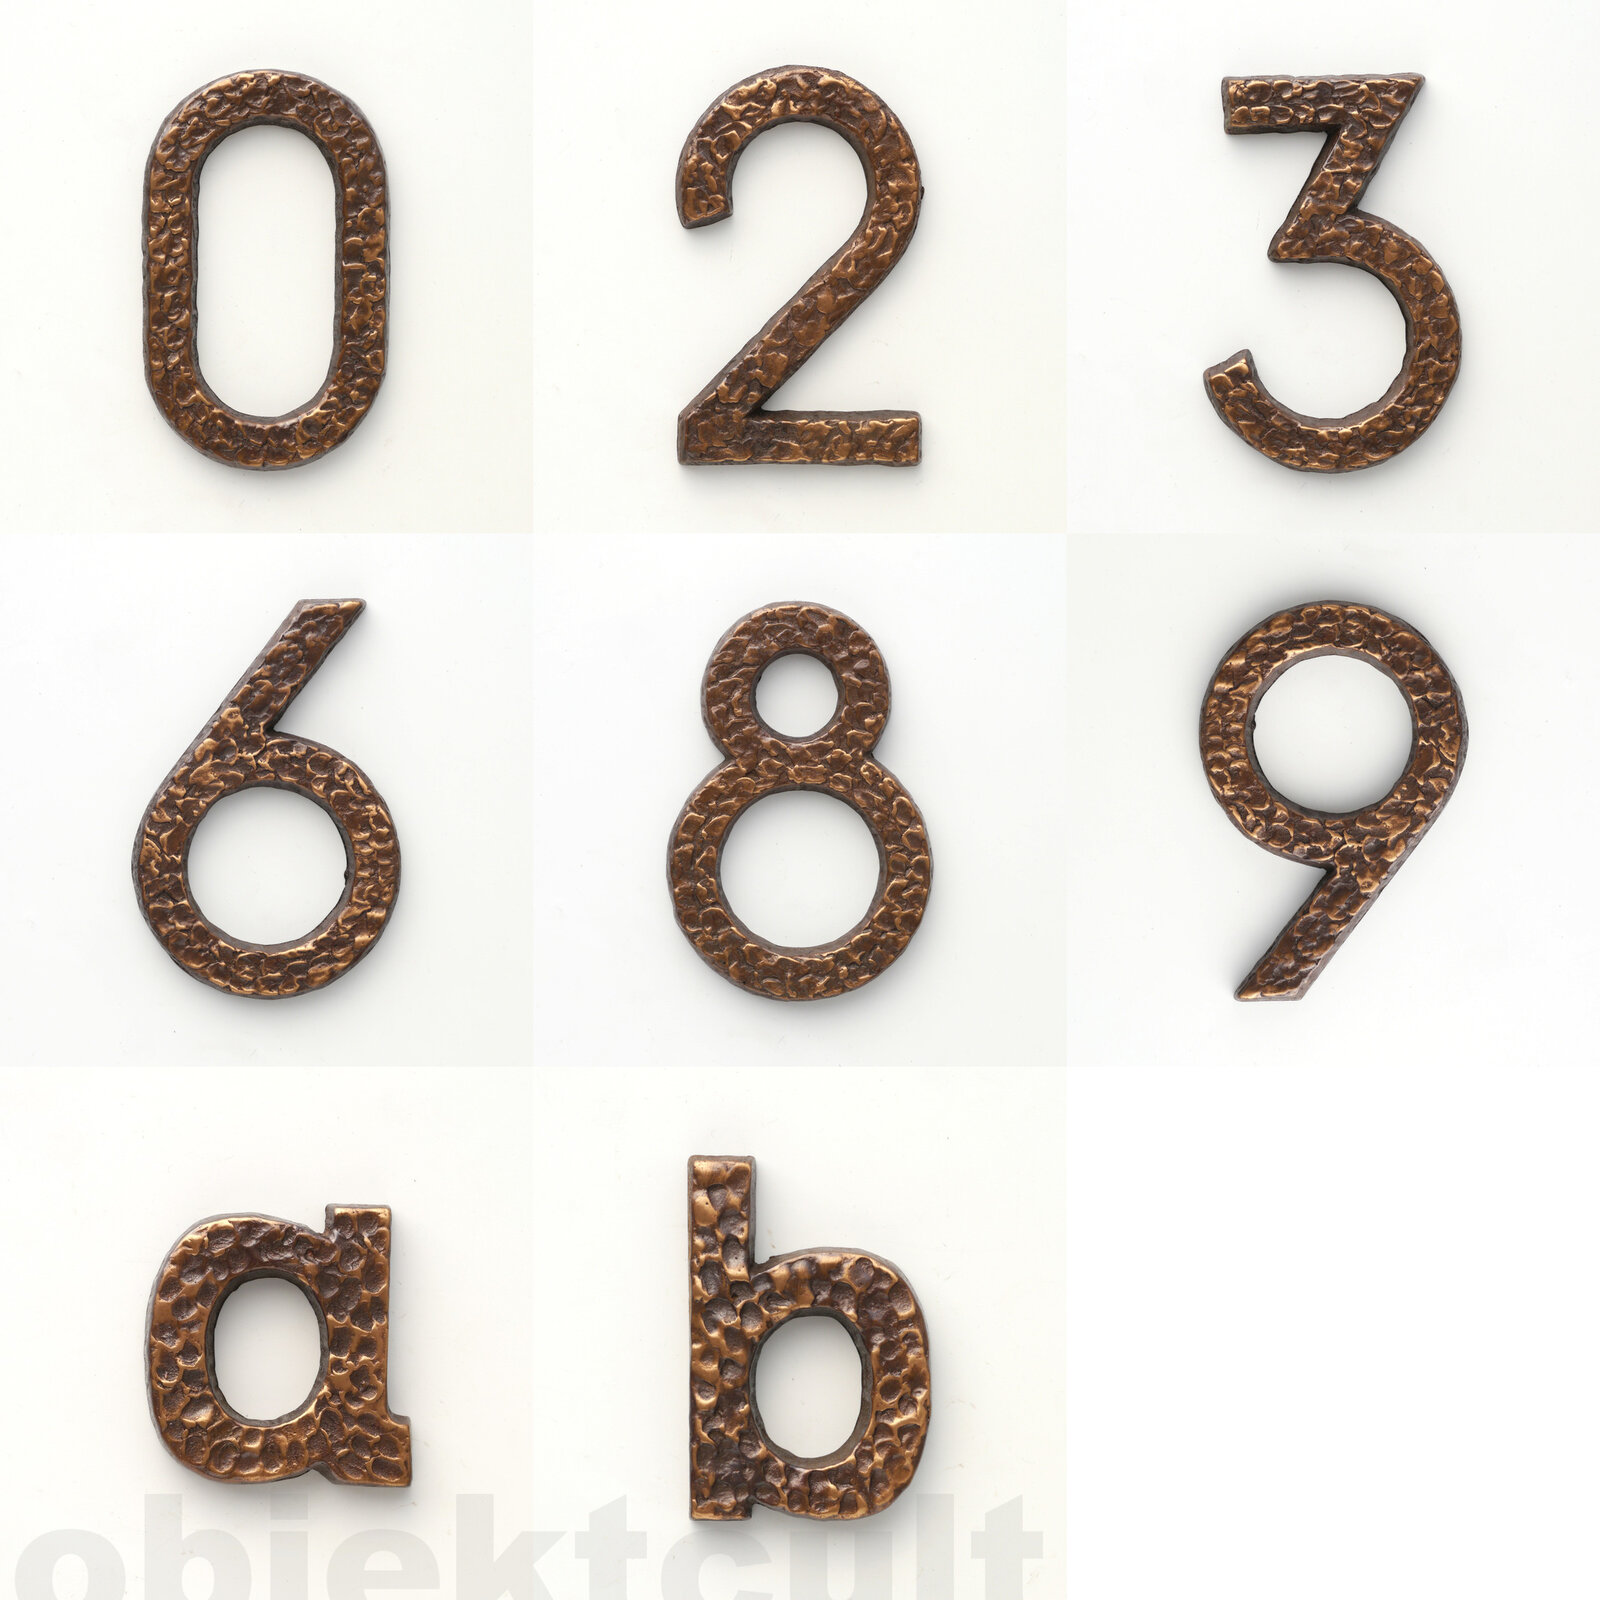 House numbers, Hausnummern, manufacturer: unknown